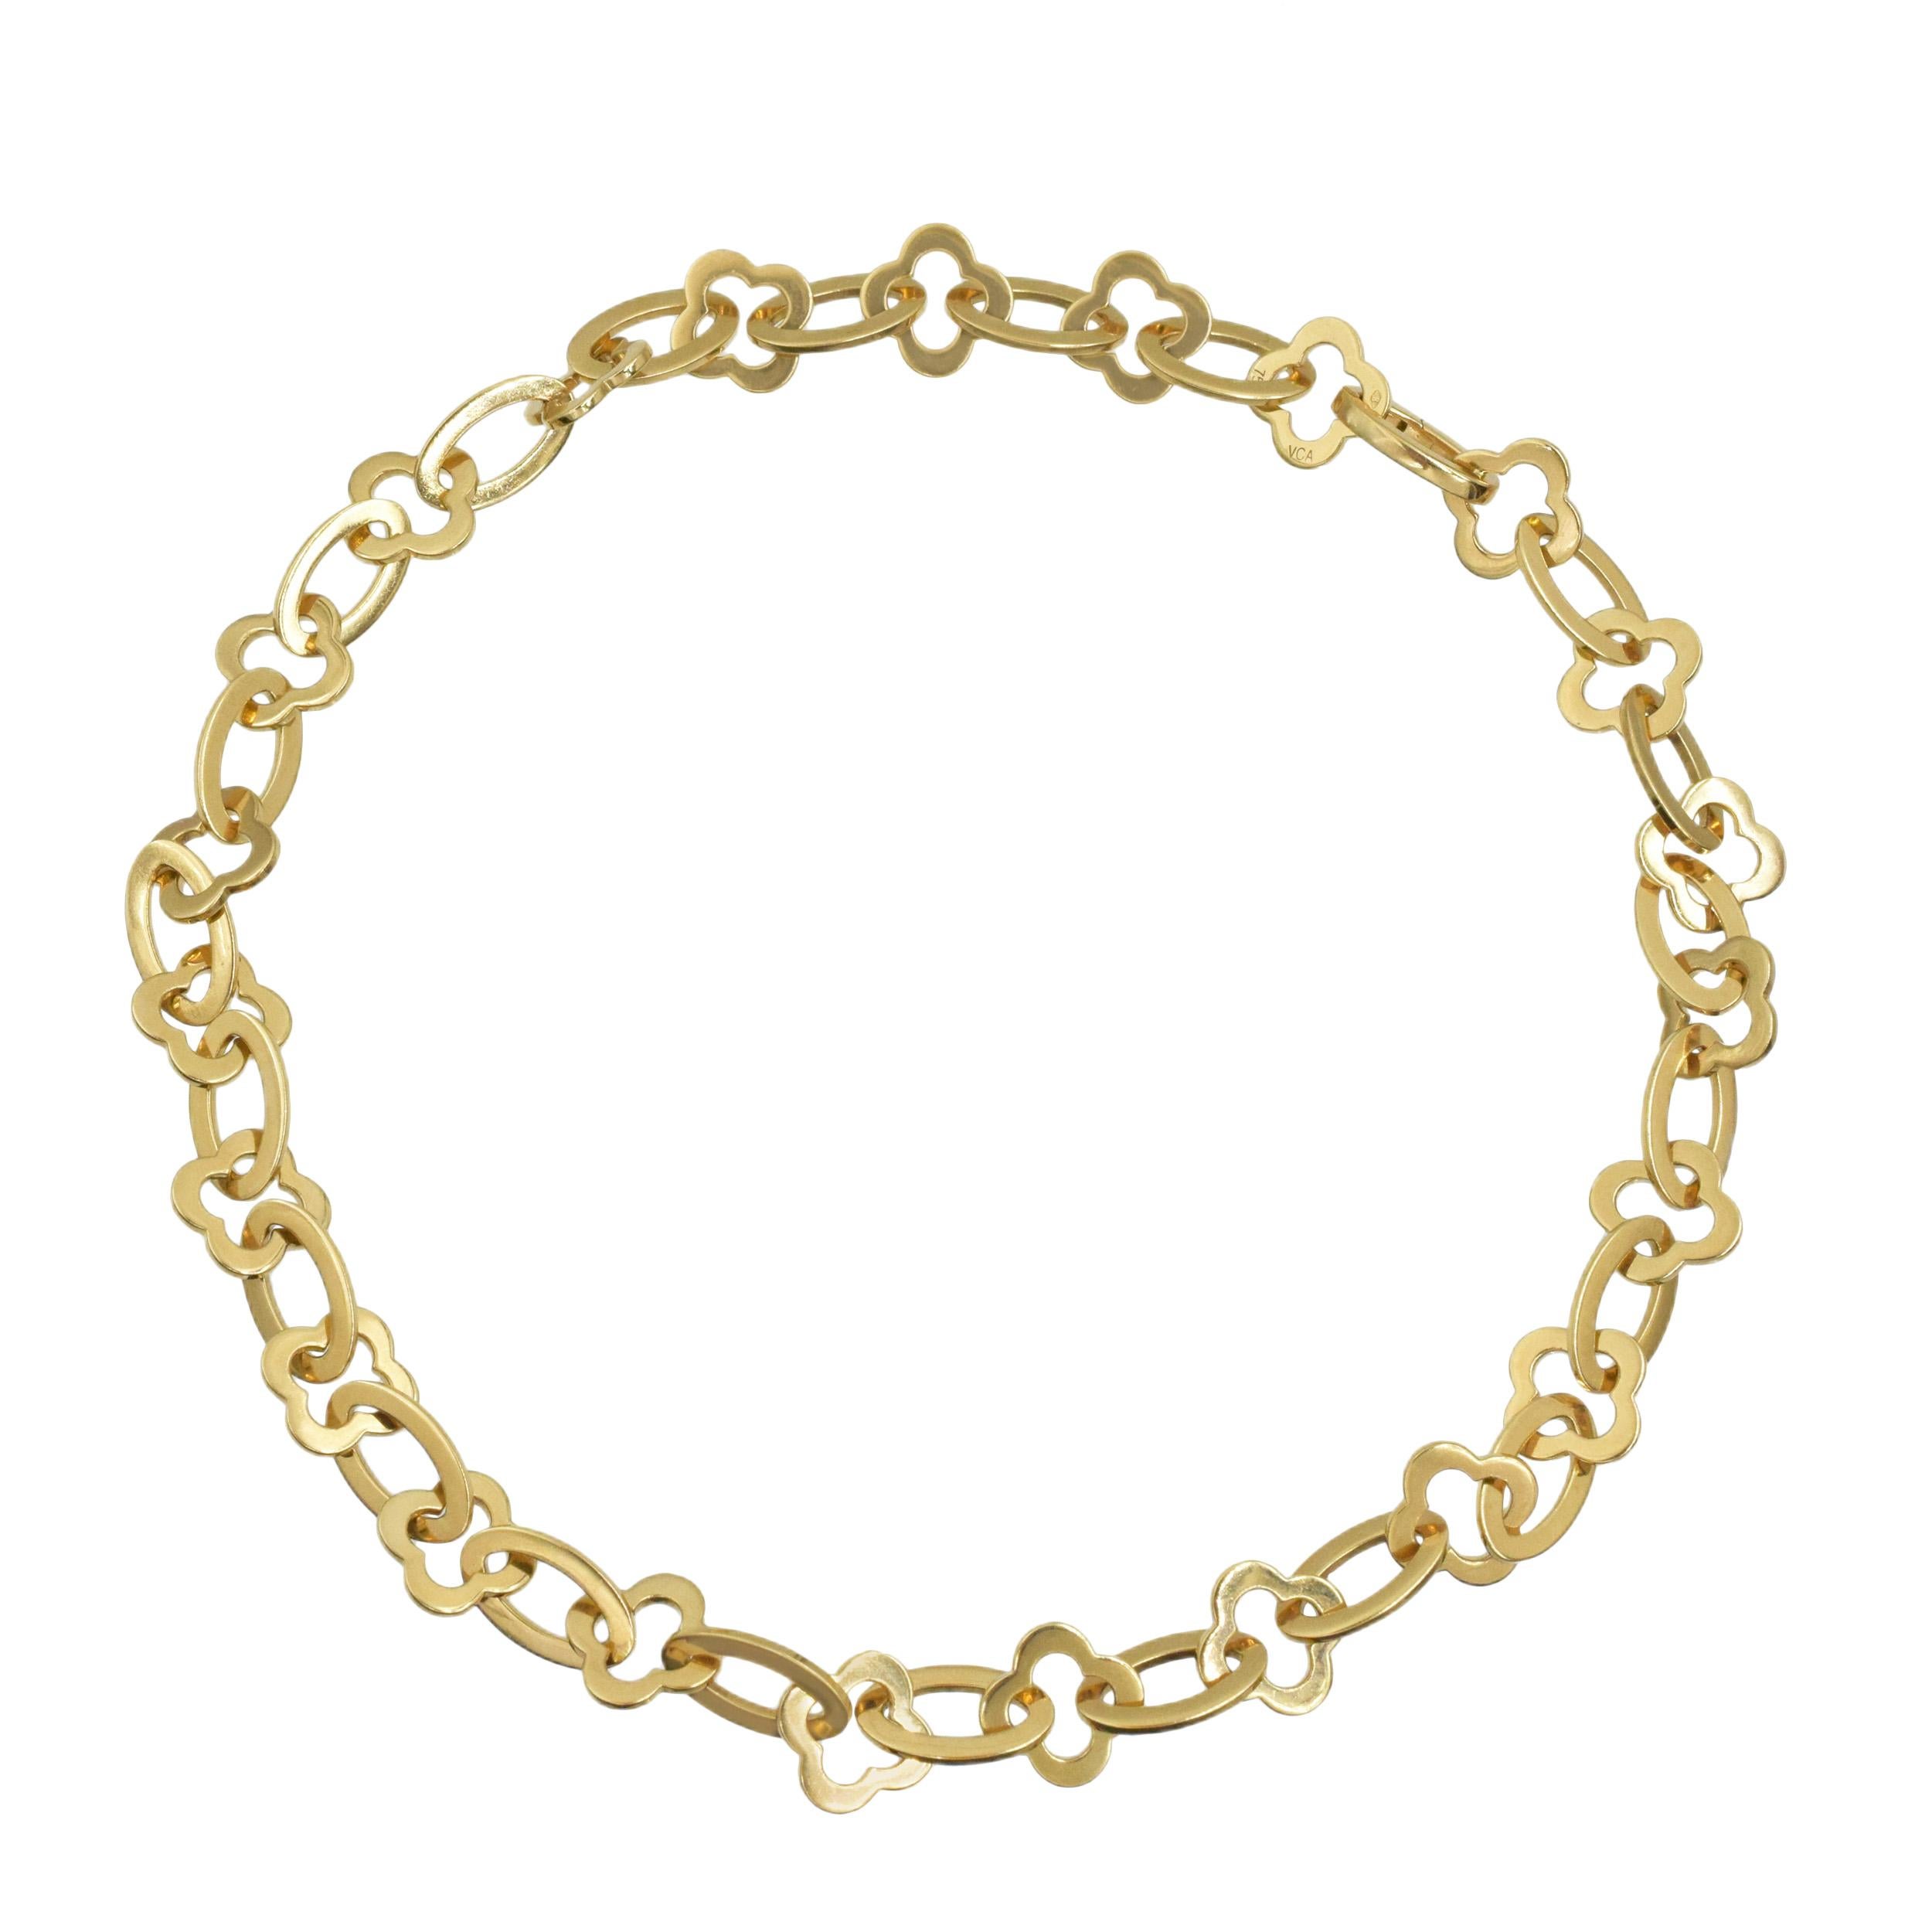 Van Cleef & Arpels 18k yellow gold Byzantine Alhambra necklace. The necklace alternates 23
open Alhambra motif links and 23 open oval shaped links. Secured with a hidden lock. Inscribed: VCA, 750, BLxxxxx. Stamped with: partially obscure French gold